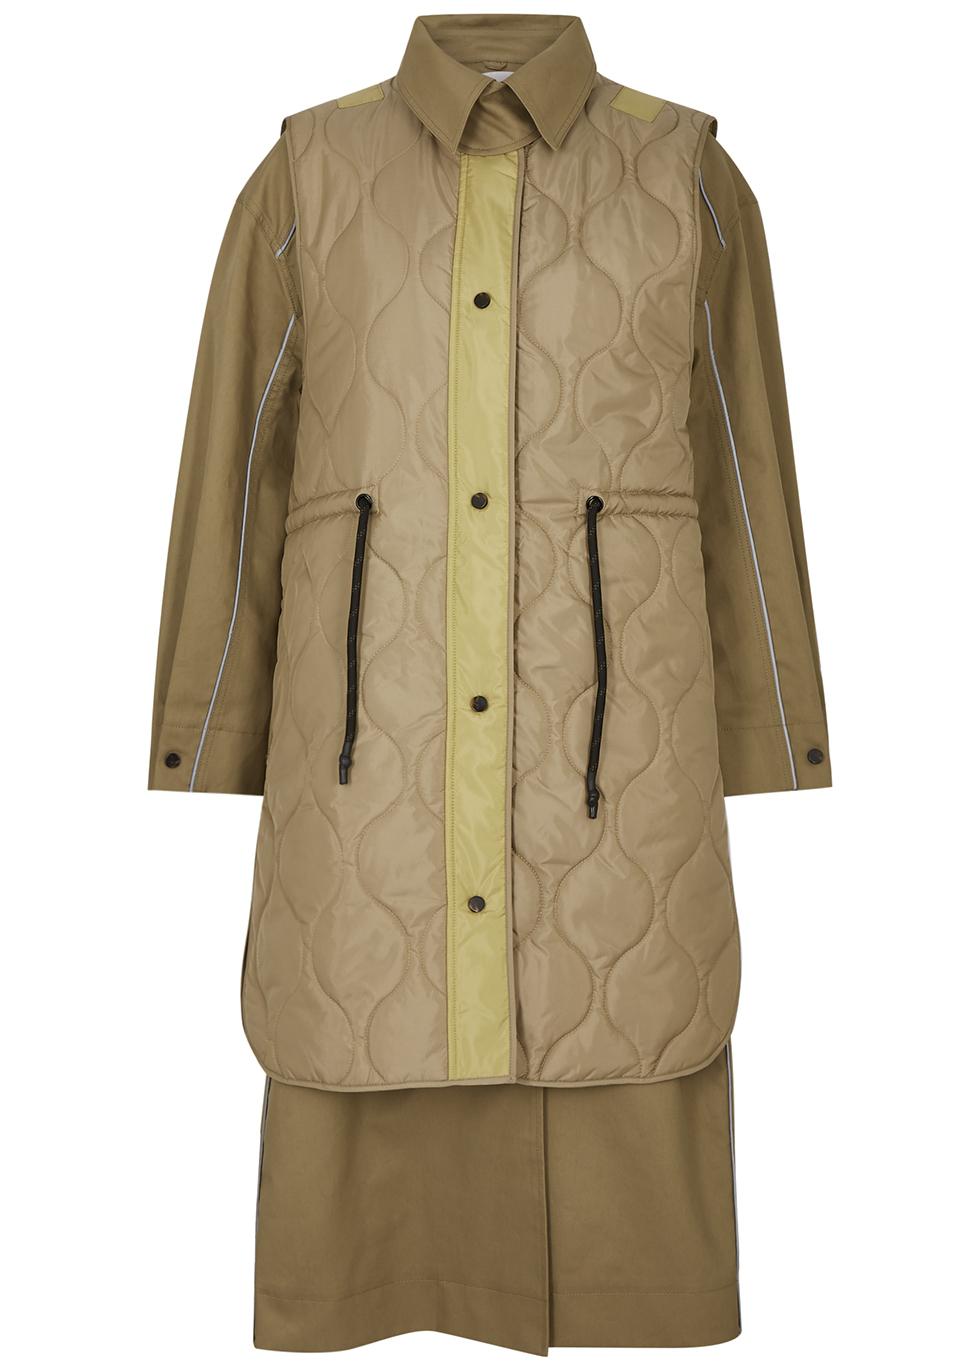 Rex brown layered cotton trench coat by DAY BIRGER ET MIKKELSEN